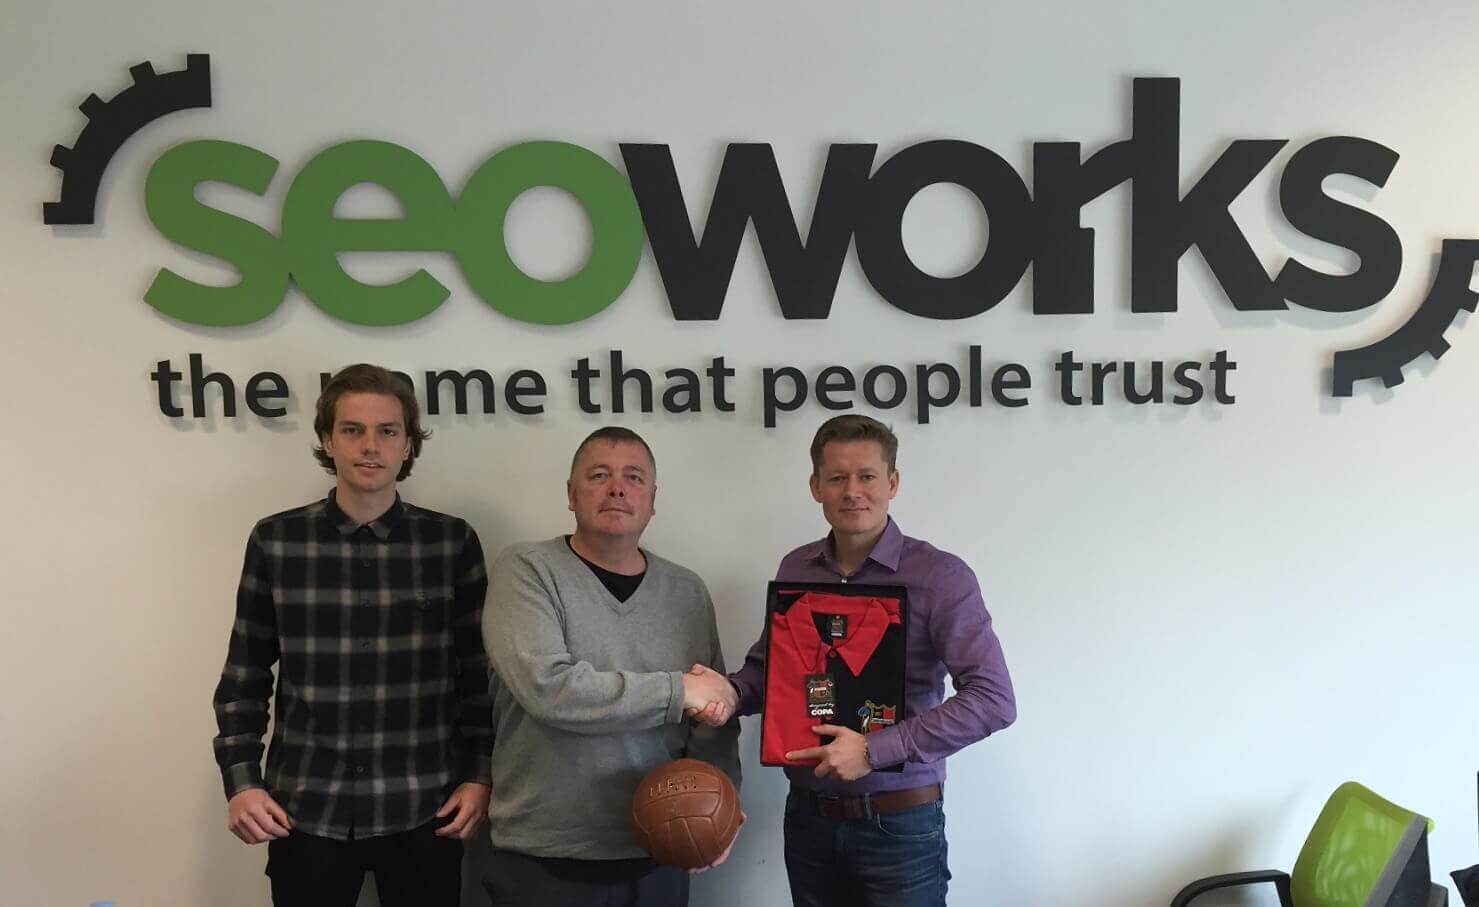 three members of The SEO Works team stood in front of logo on the wall behind